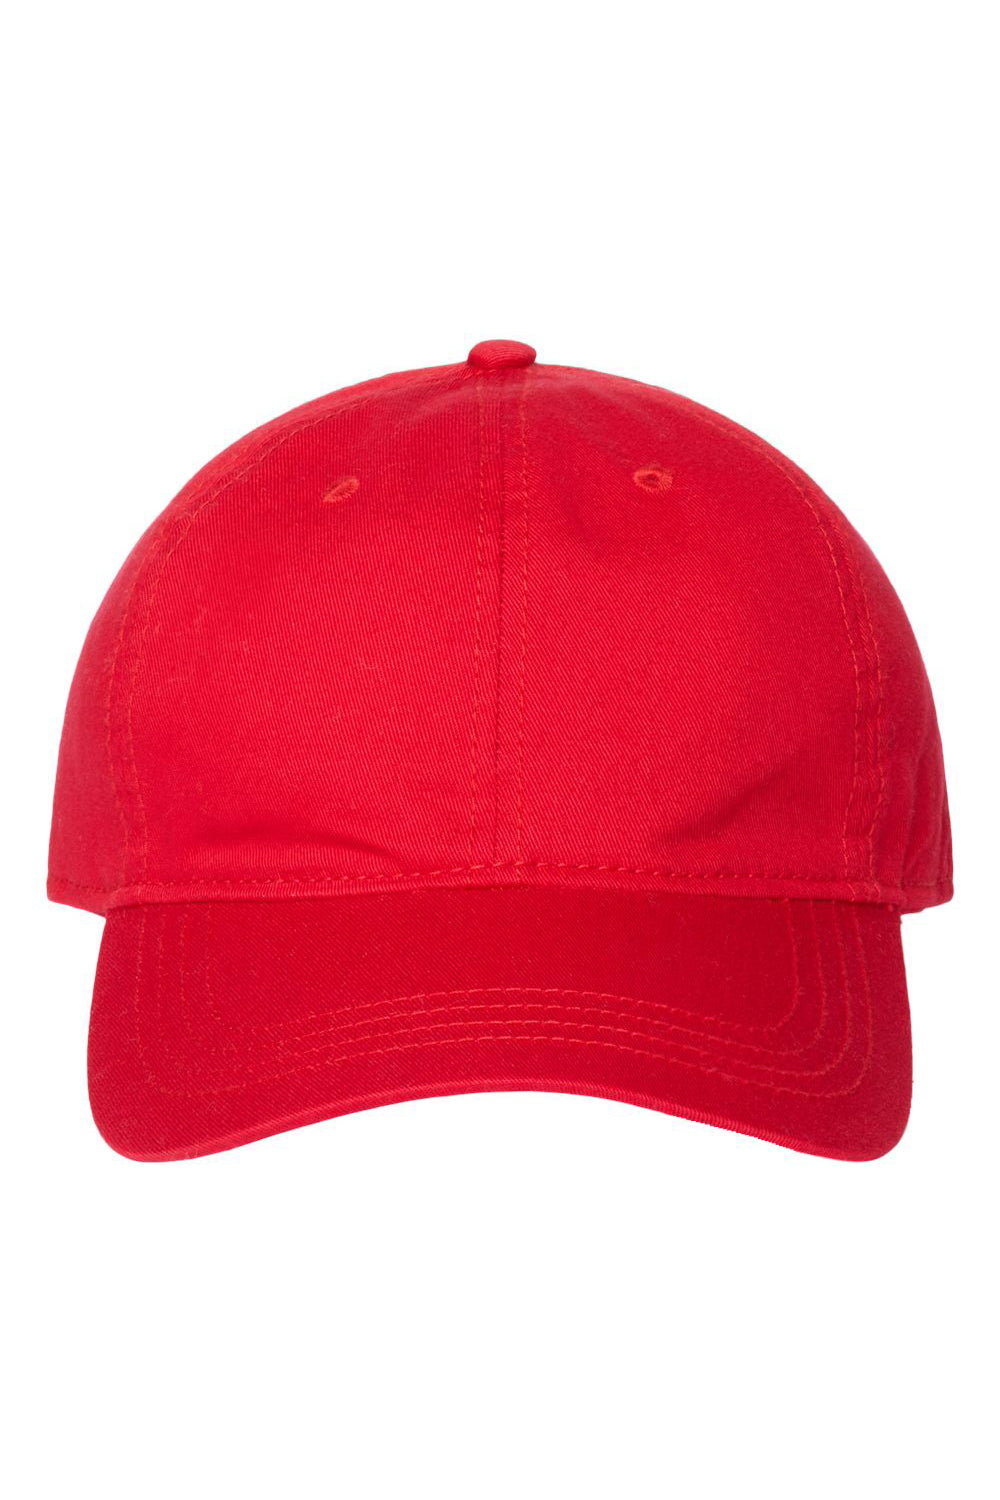 Cap America i1002 Mens Relaxed Adjustable Dad Hat Red Flat Front